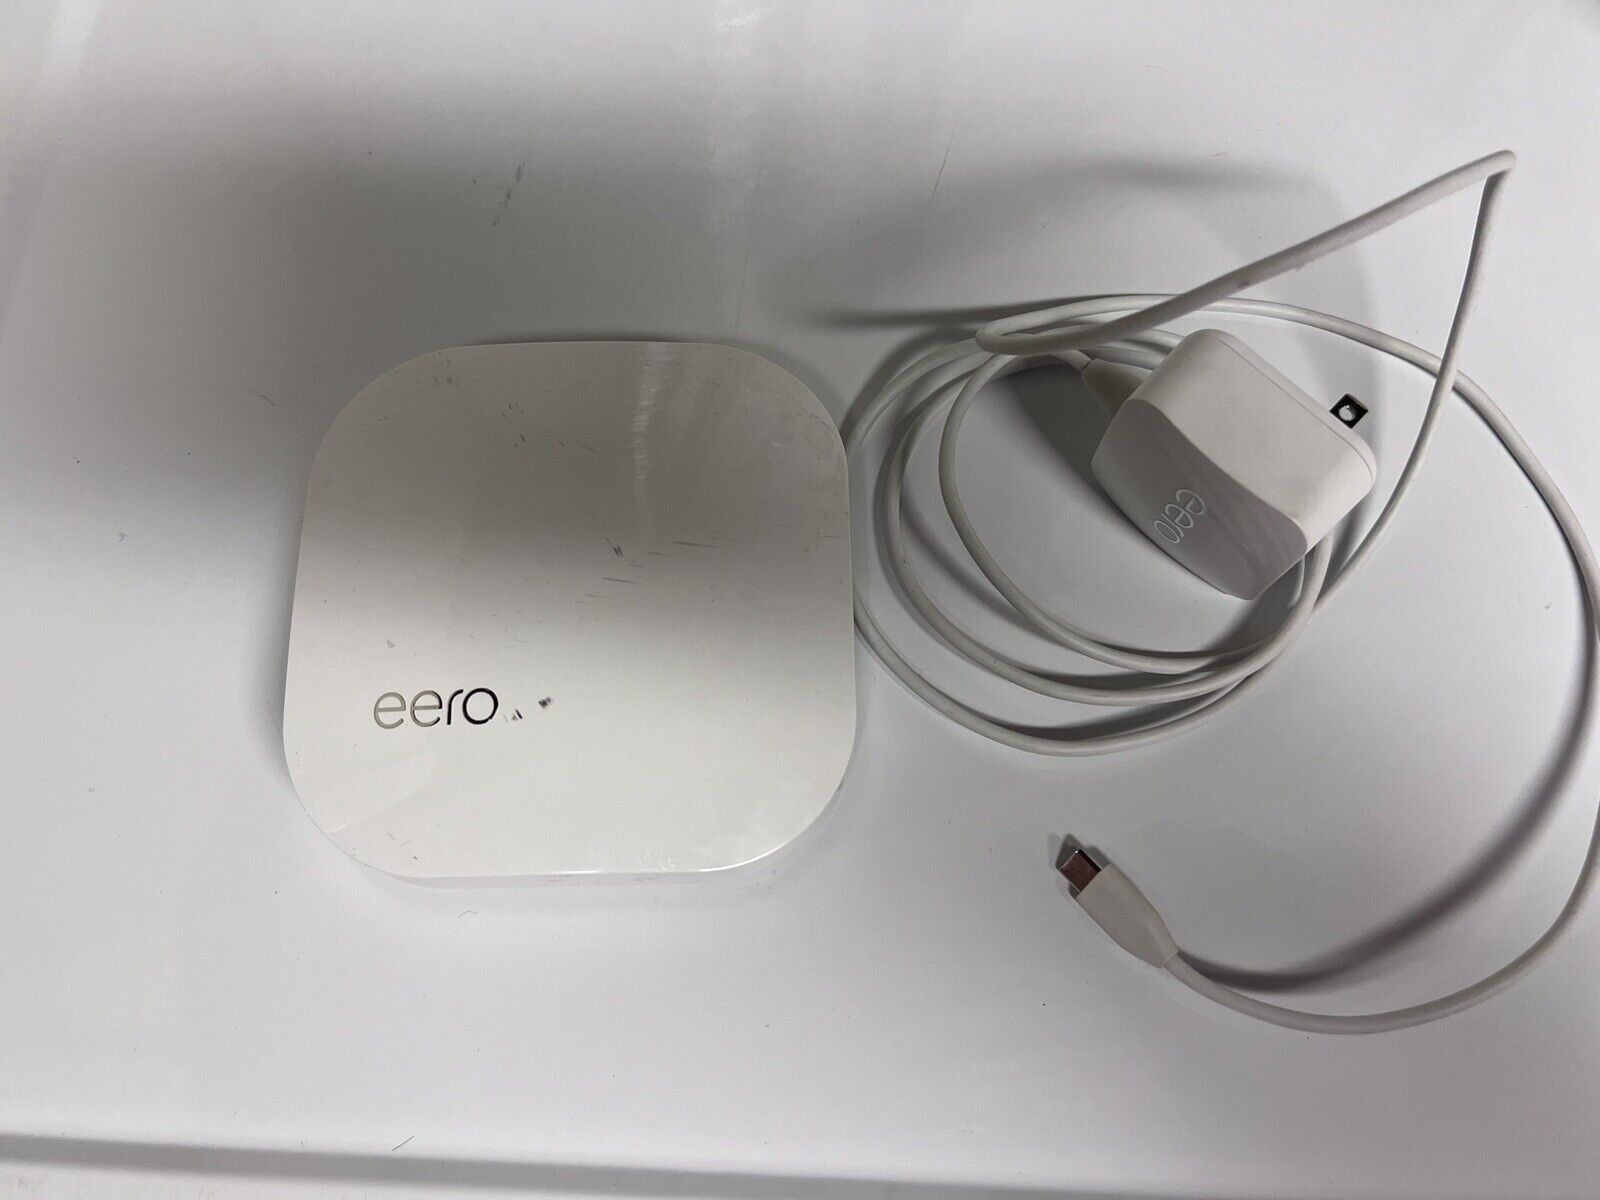 eero Pro B010001 2nd Generation AC Tri-Band Mesh Router - White